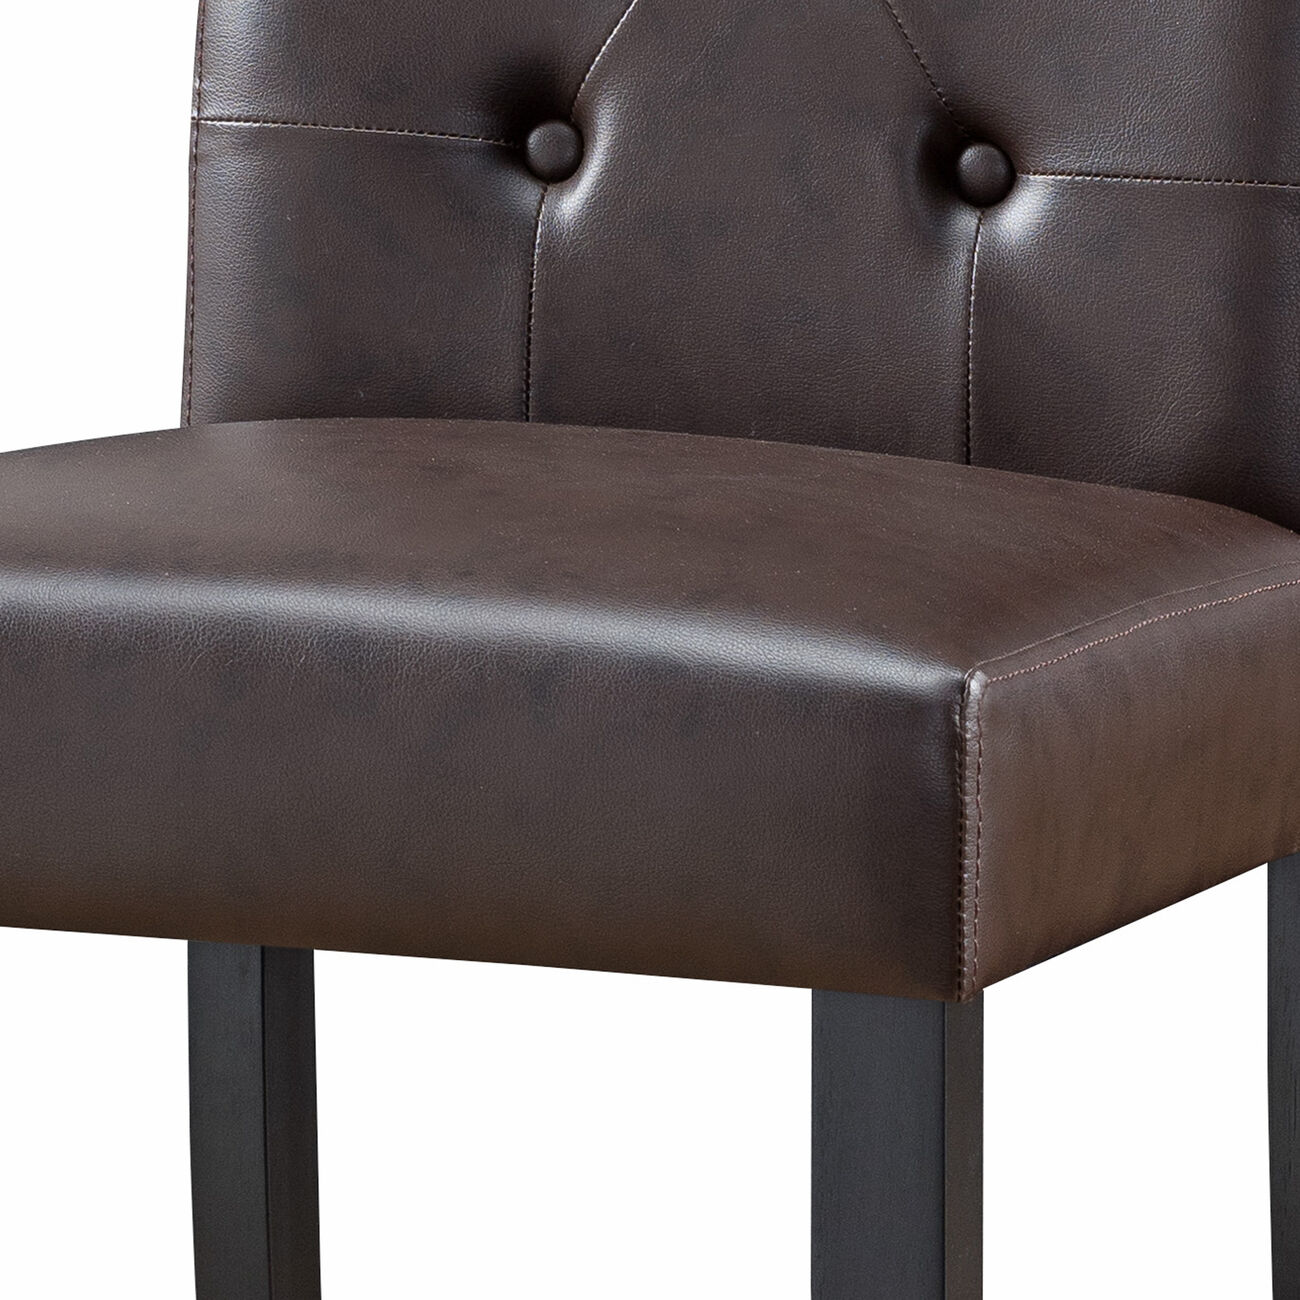 Leatherette Dining Chair with Tufted Back, Set of 2, Espresso Brown